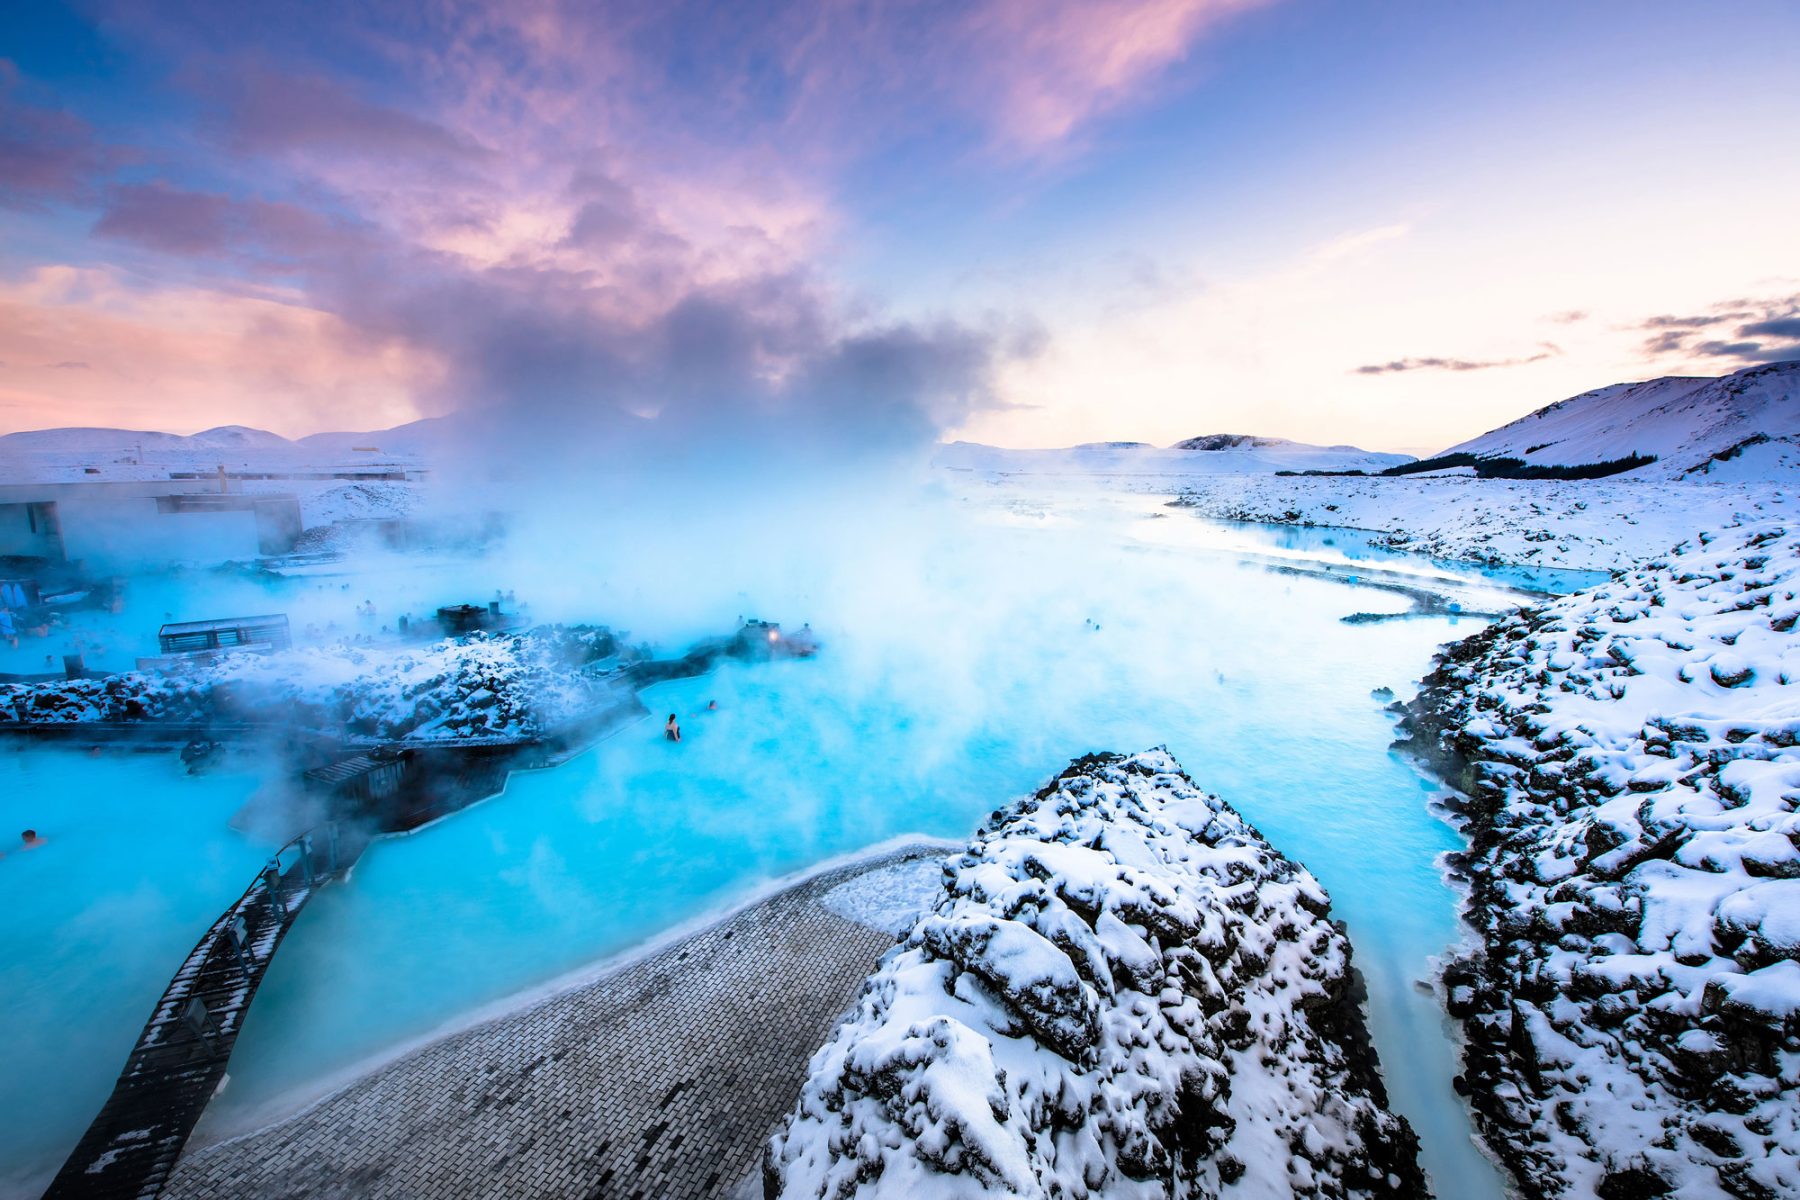 The Complete Guide To The Blue Lagoon Iceland (Tips, FAQ, And More